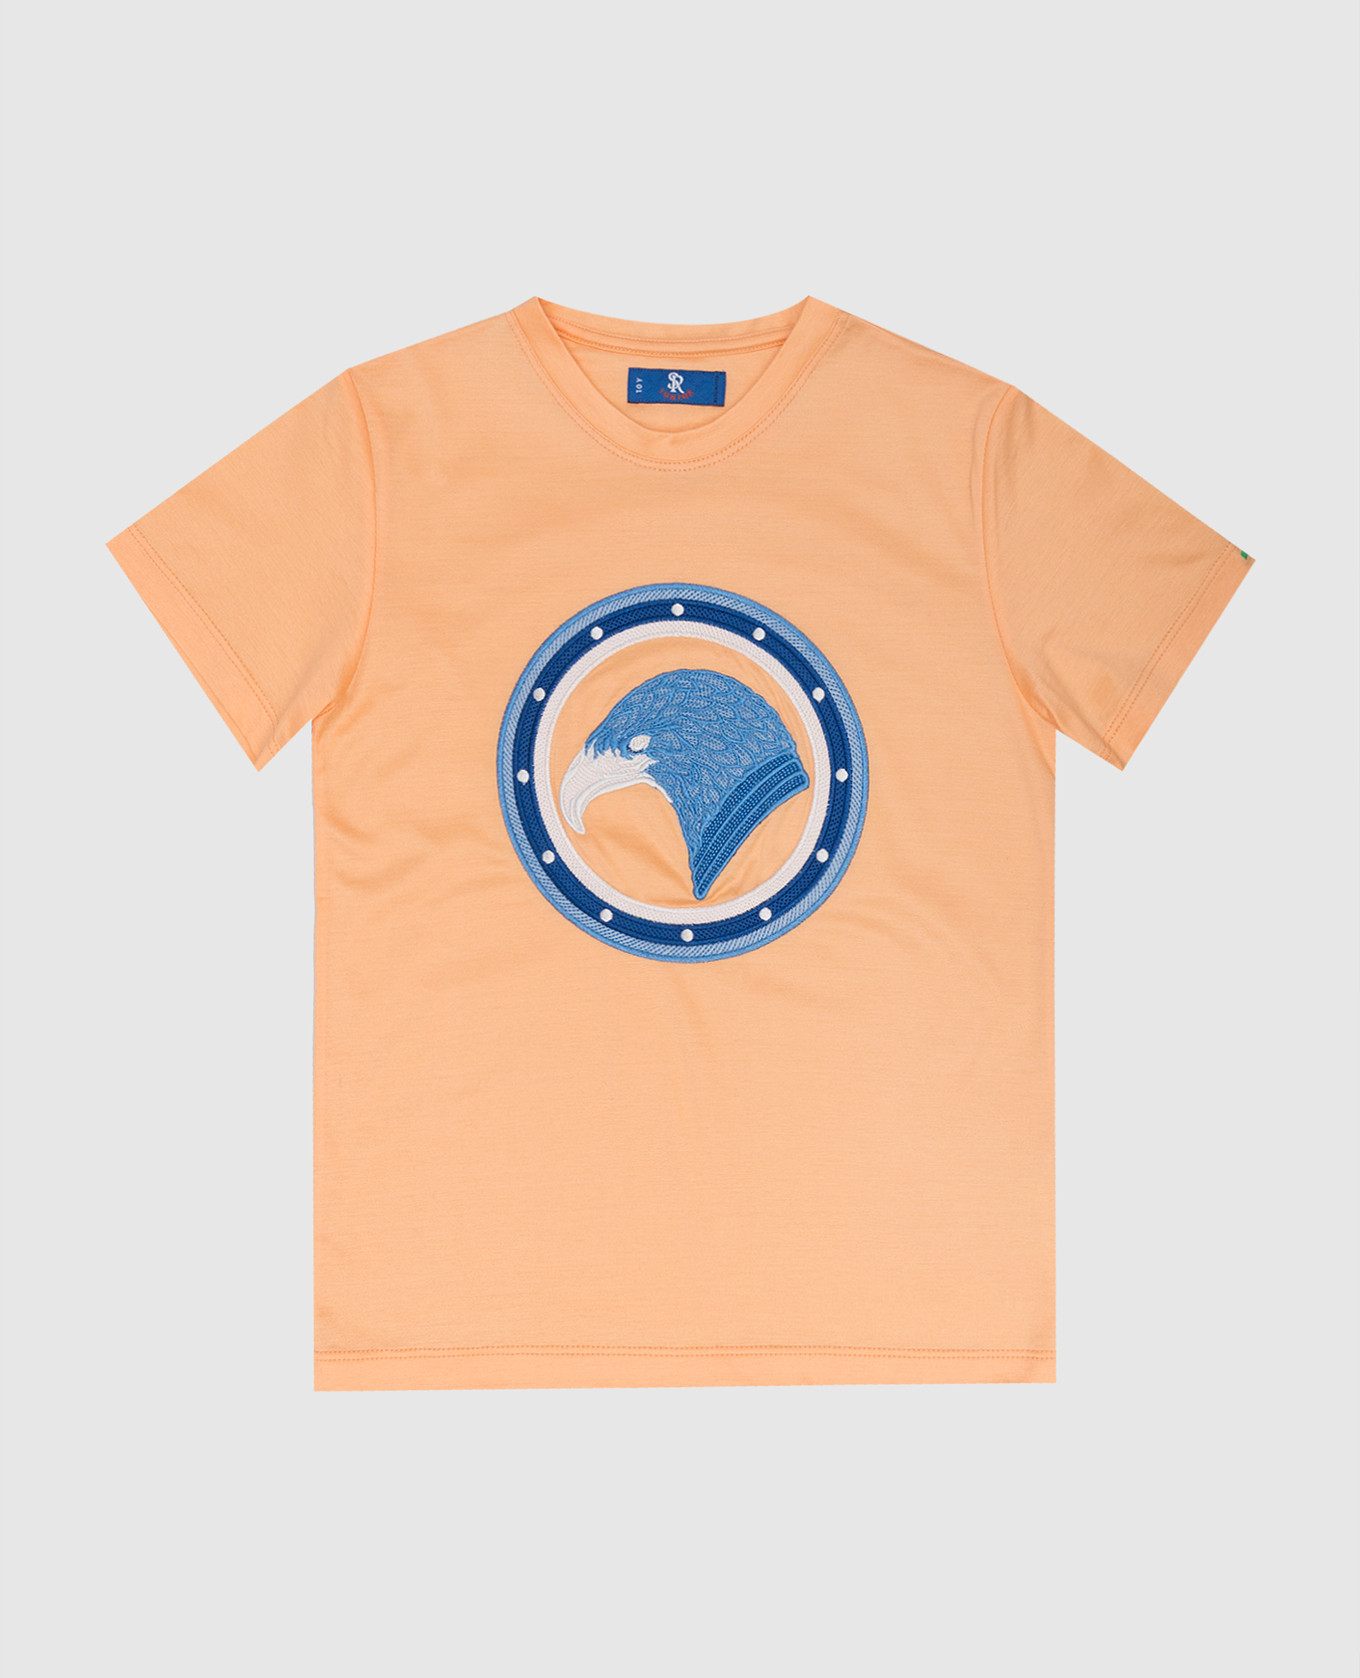 Children's orange t-shirt with logo embroidery